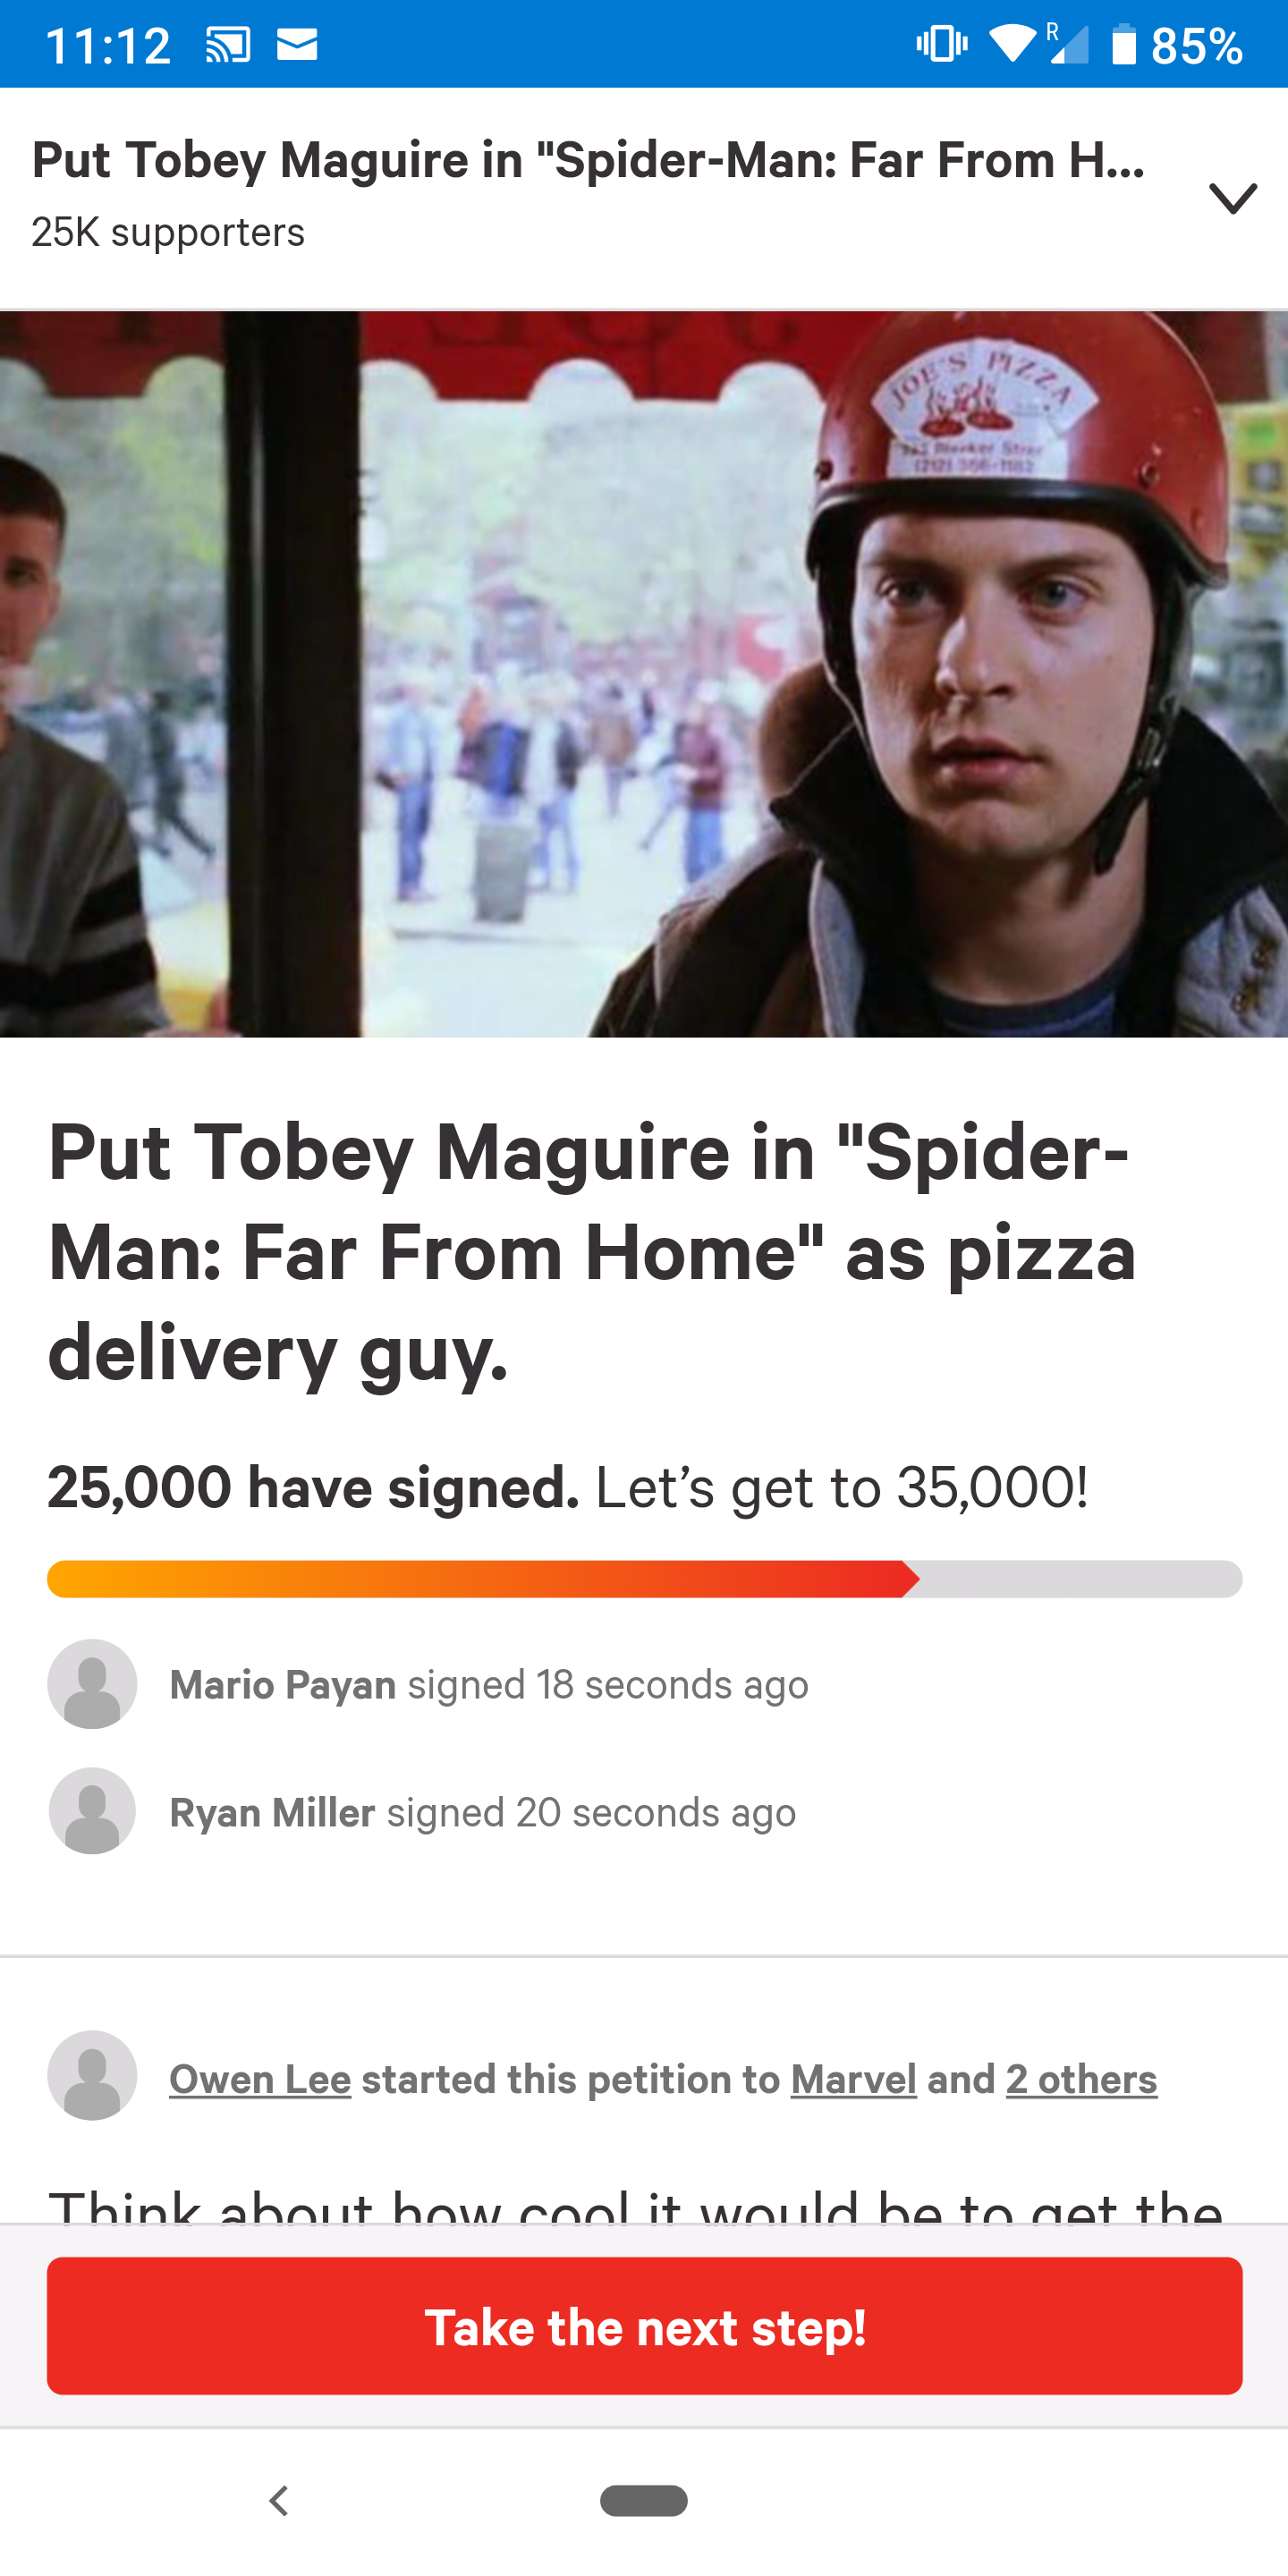 tobey maguire in far from home - E 0 . 85% Put Tobey Maguire in "SpiderMan Far From H.. 25K supporters Put Tobey Maguire in "Spider Man Far From Home" as pizza delivery guy. 25,000 have signed. Let's get to 35,000! Mario Payan signed 18 seconds ago Ryan M